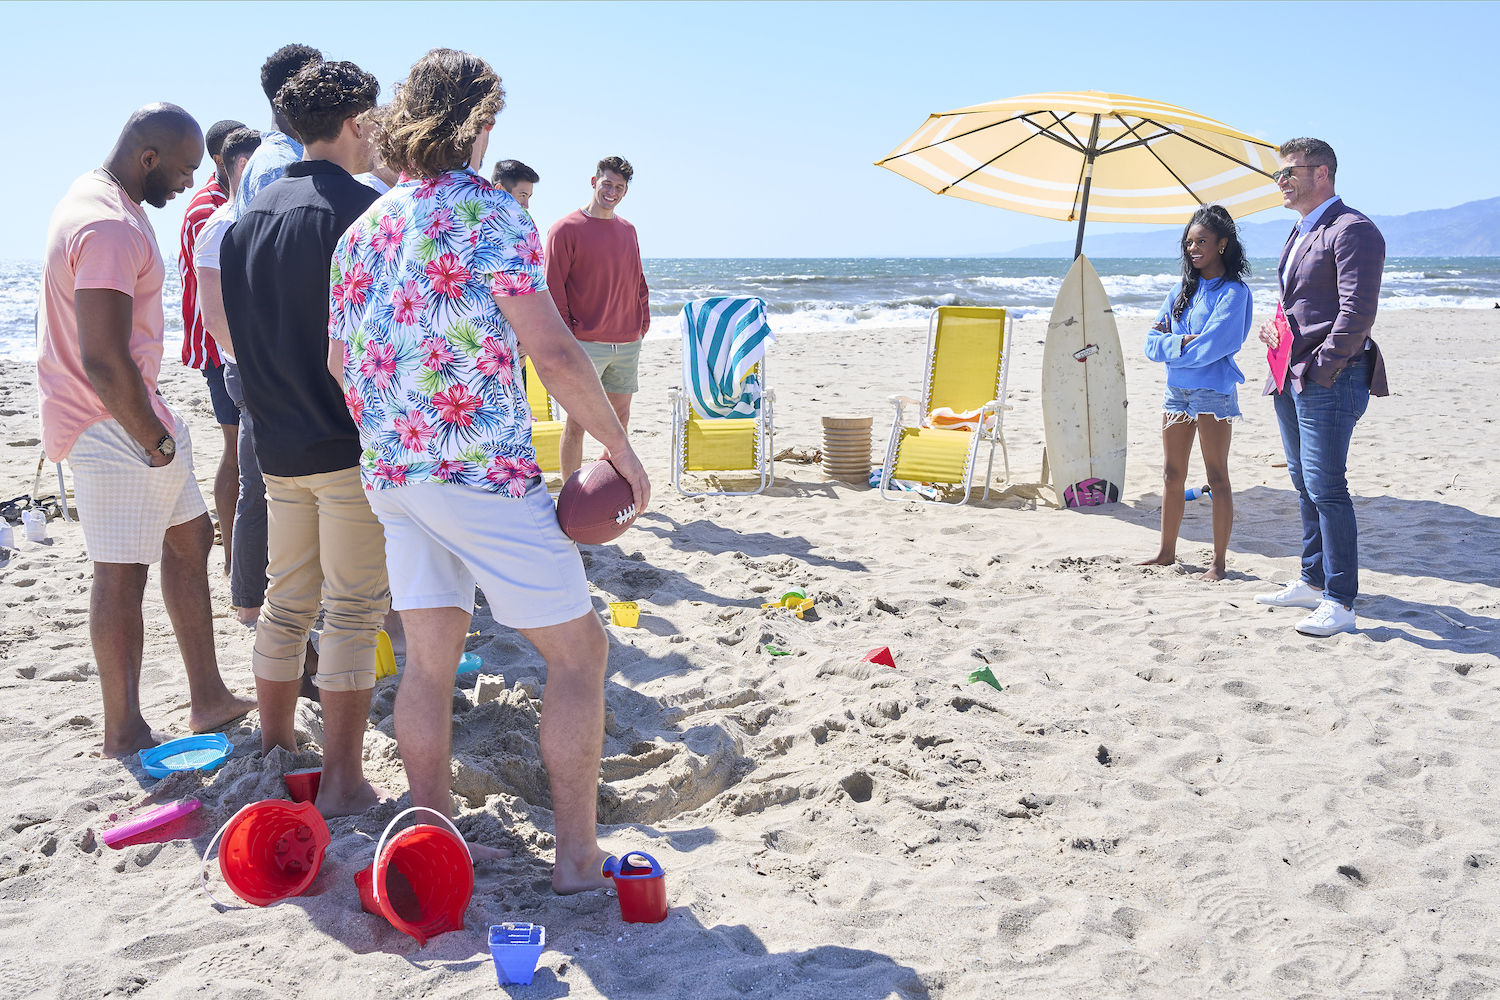 'The Bachelorette' 2023 cast members on the beach facing Charity Lawson and Jesse Palmer